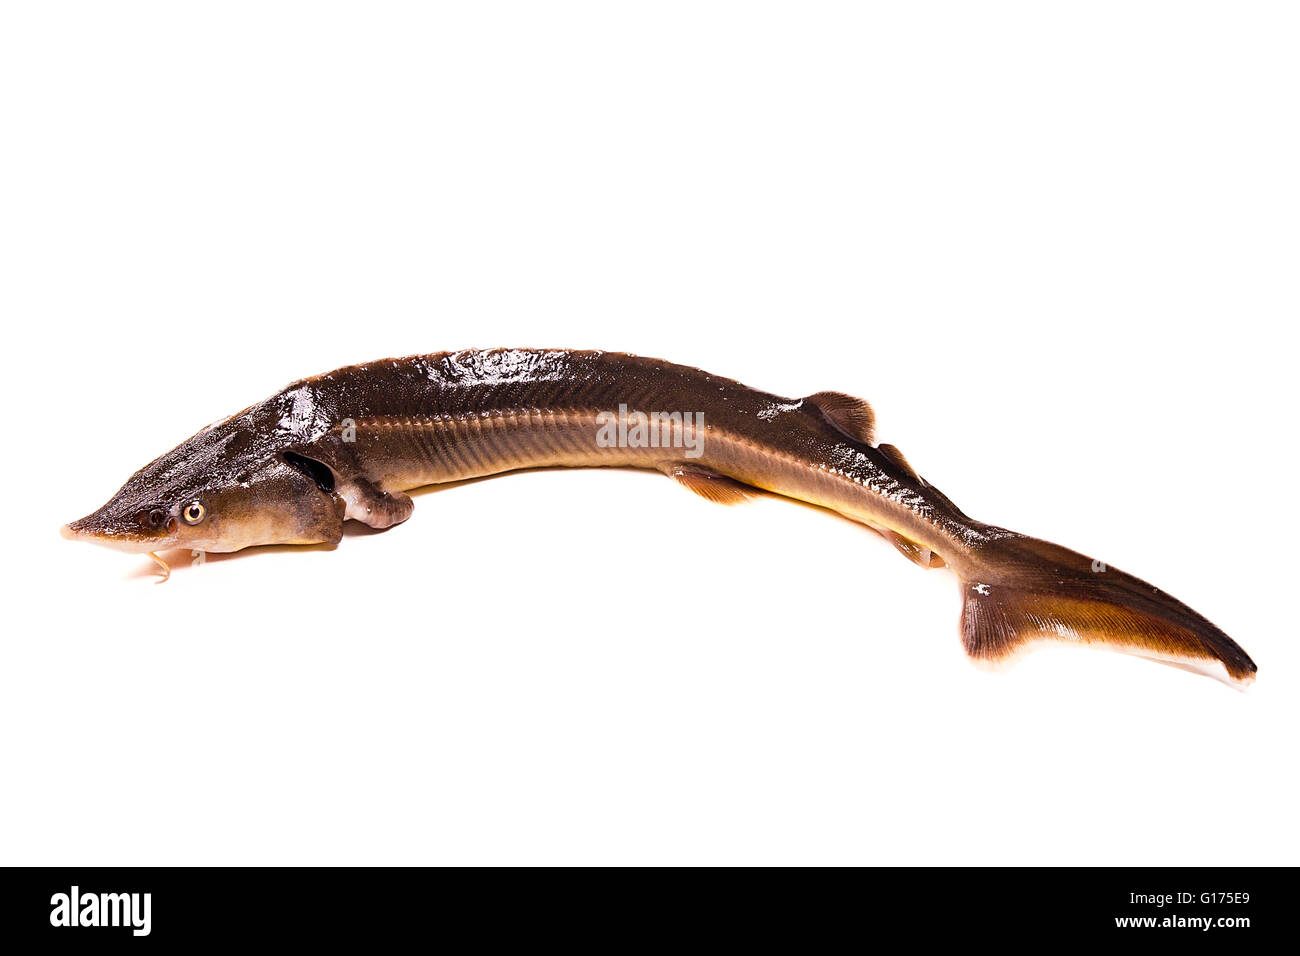 Fresh small sturgeon fish isolated on white background. Fresh sterlet fish just taken from the water. Stock Photo